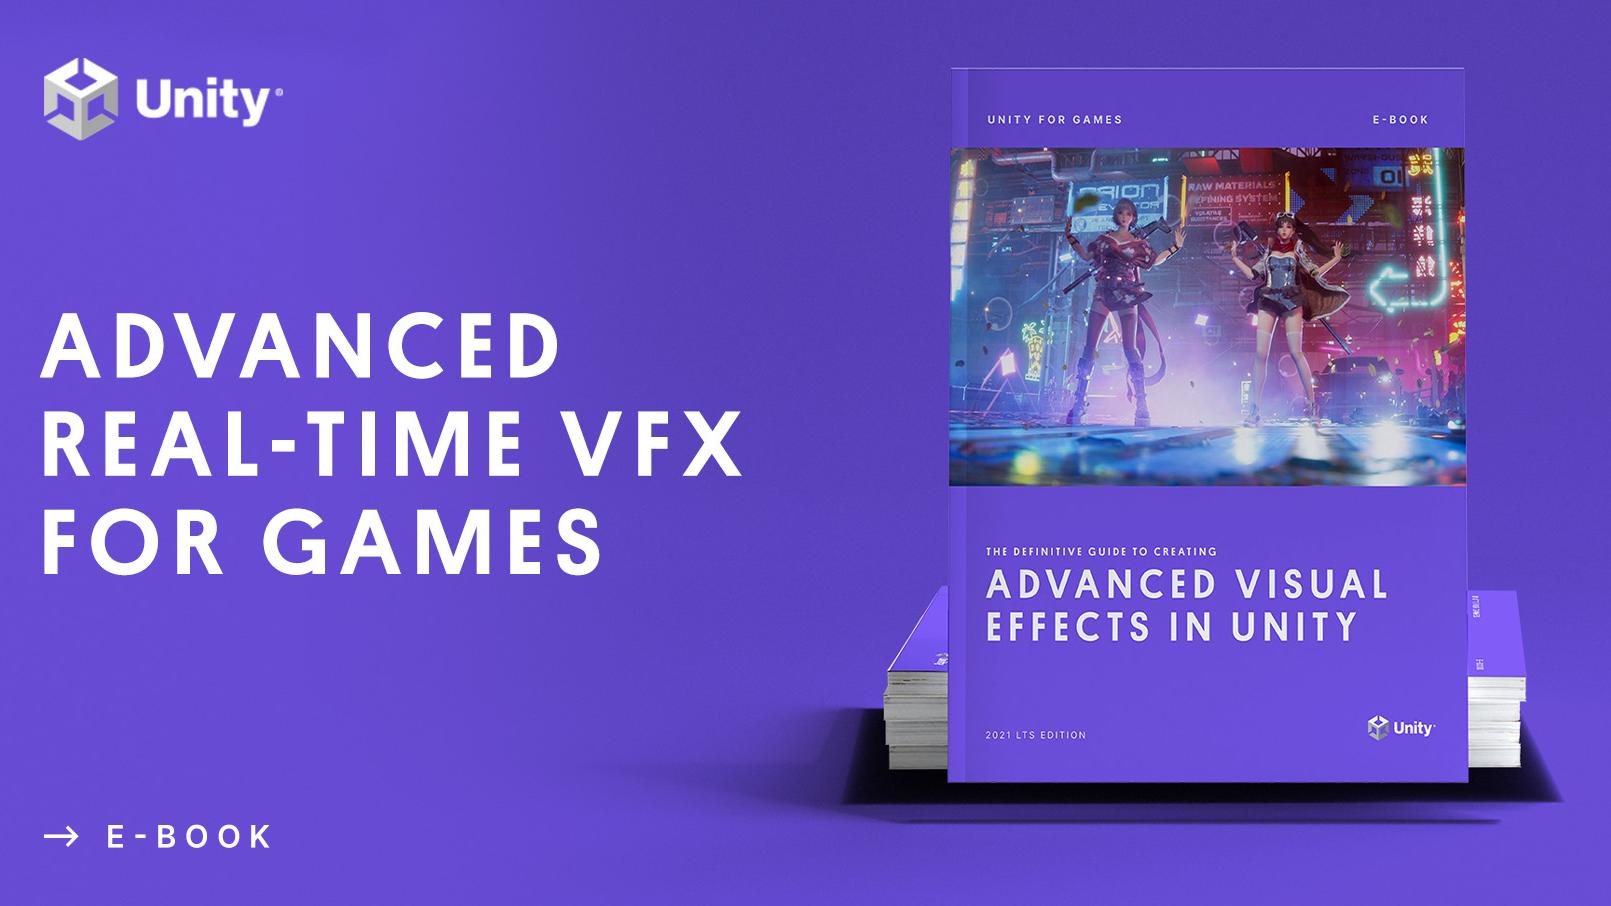 The definitive guide to creating advanced visual effects in Unity | E-book